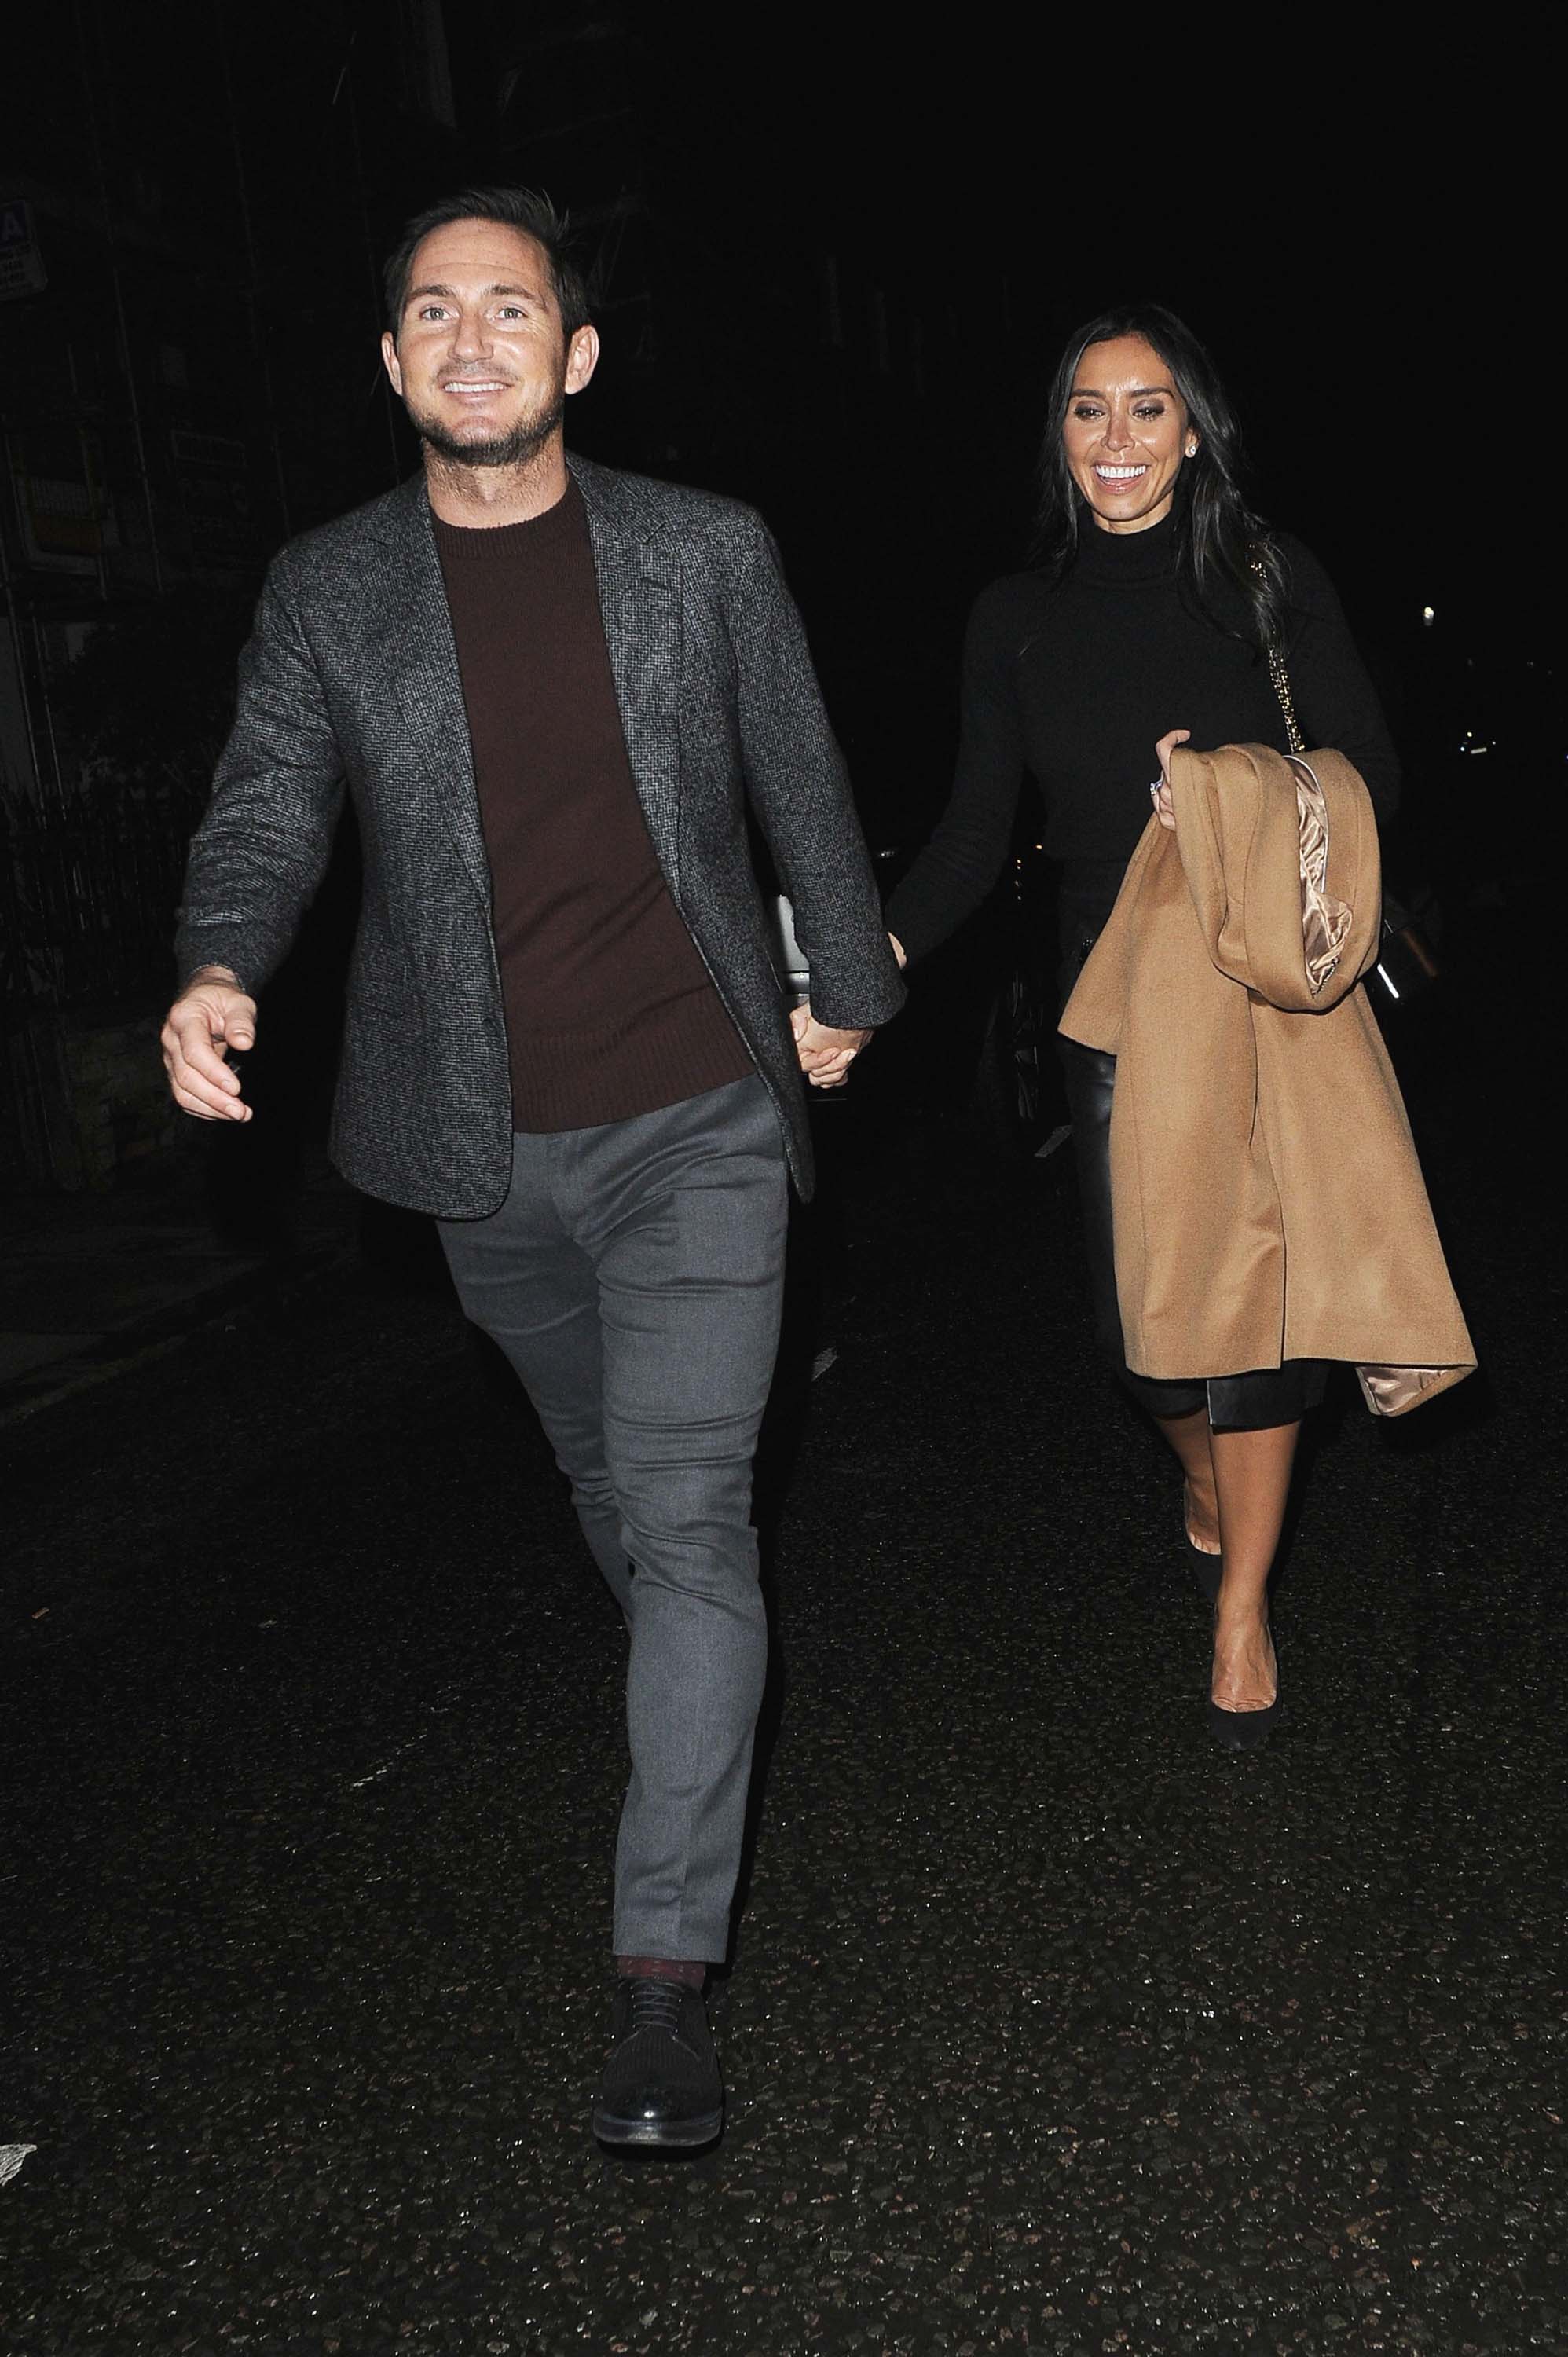 Christine Bleakley attends Piers Morgan’s Christmas Party